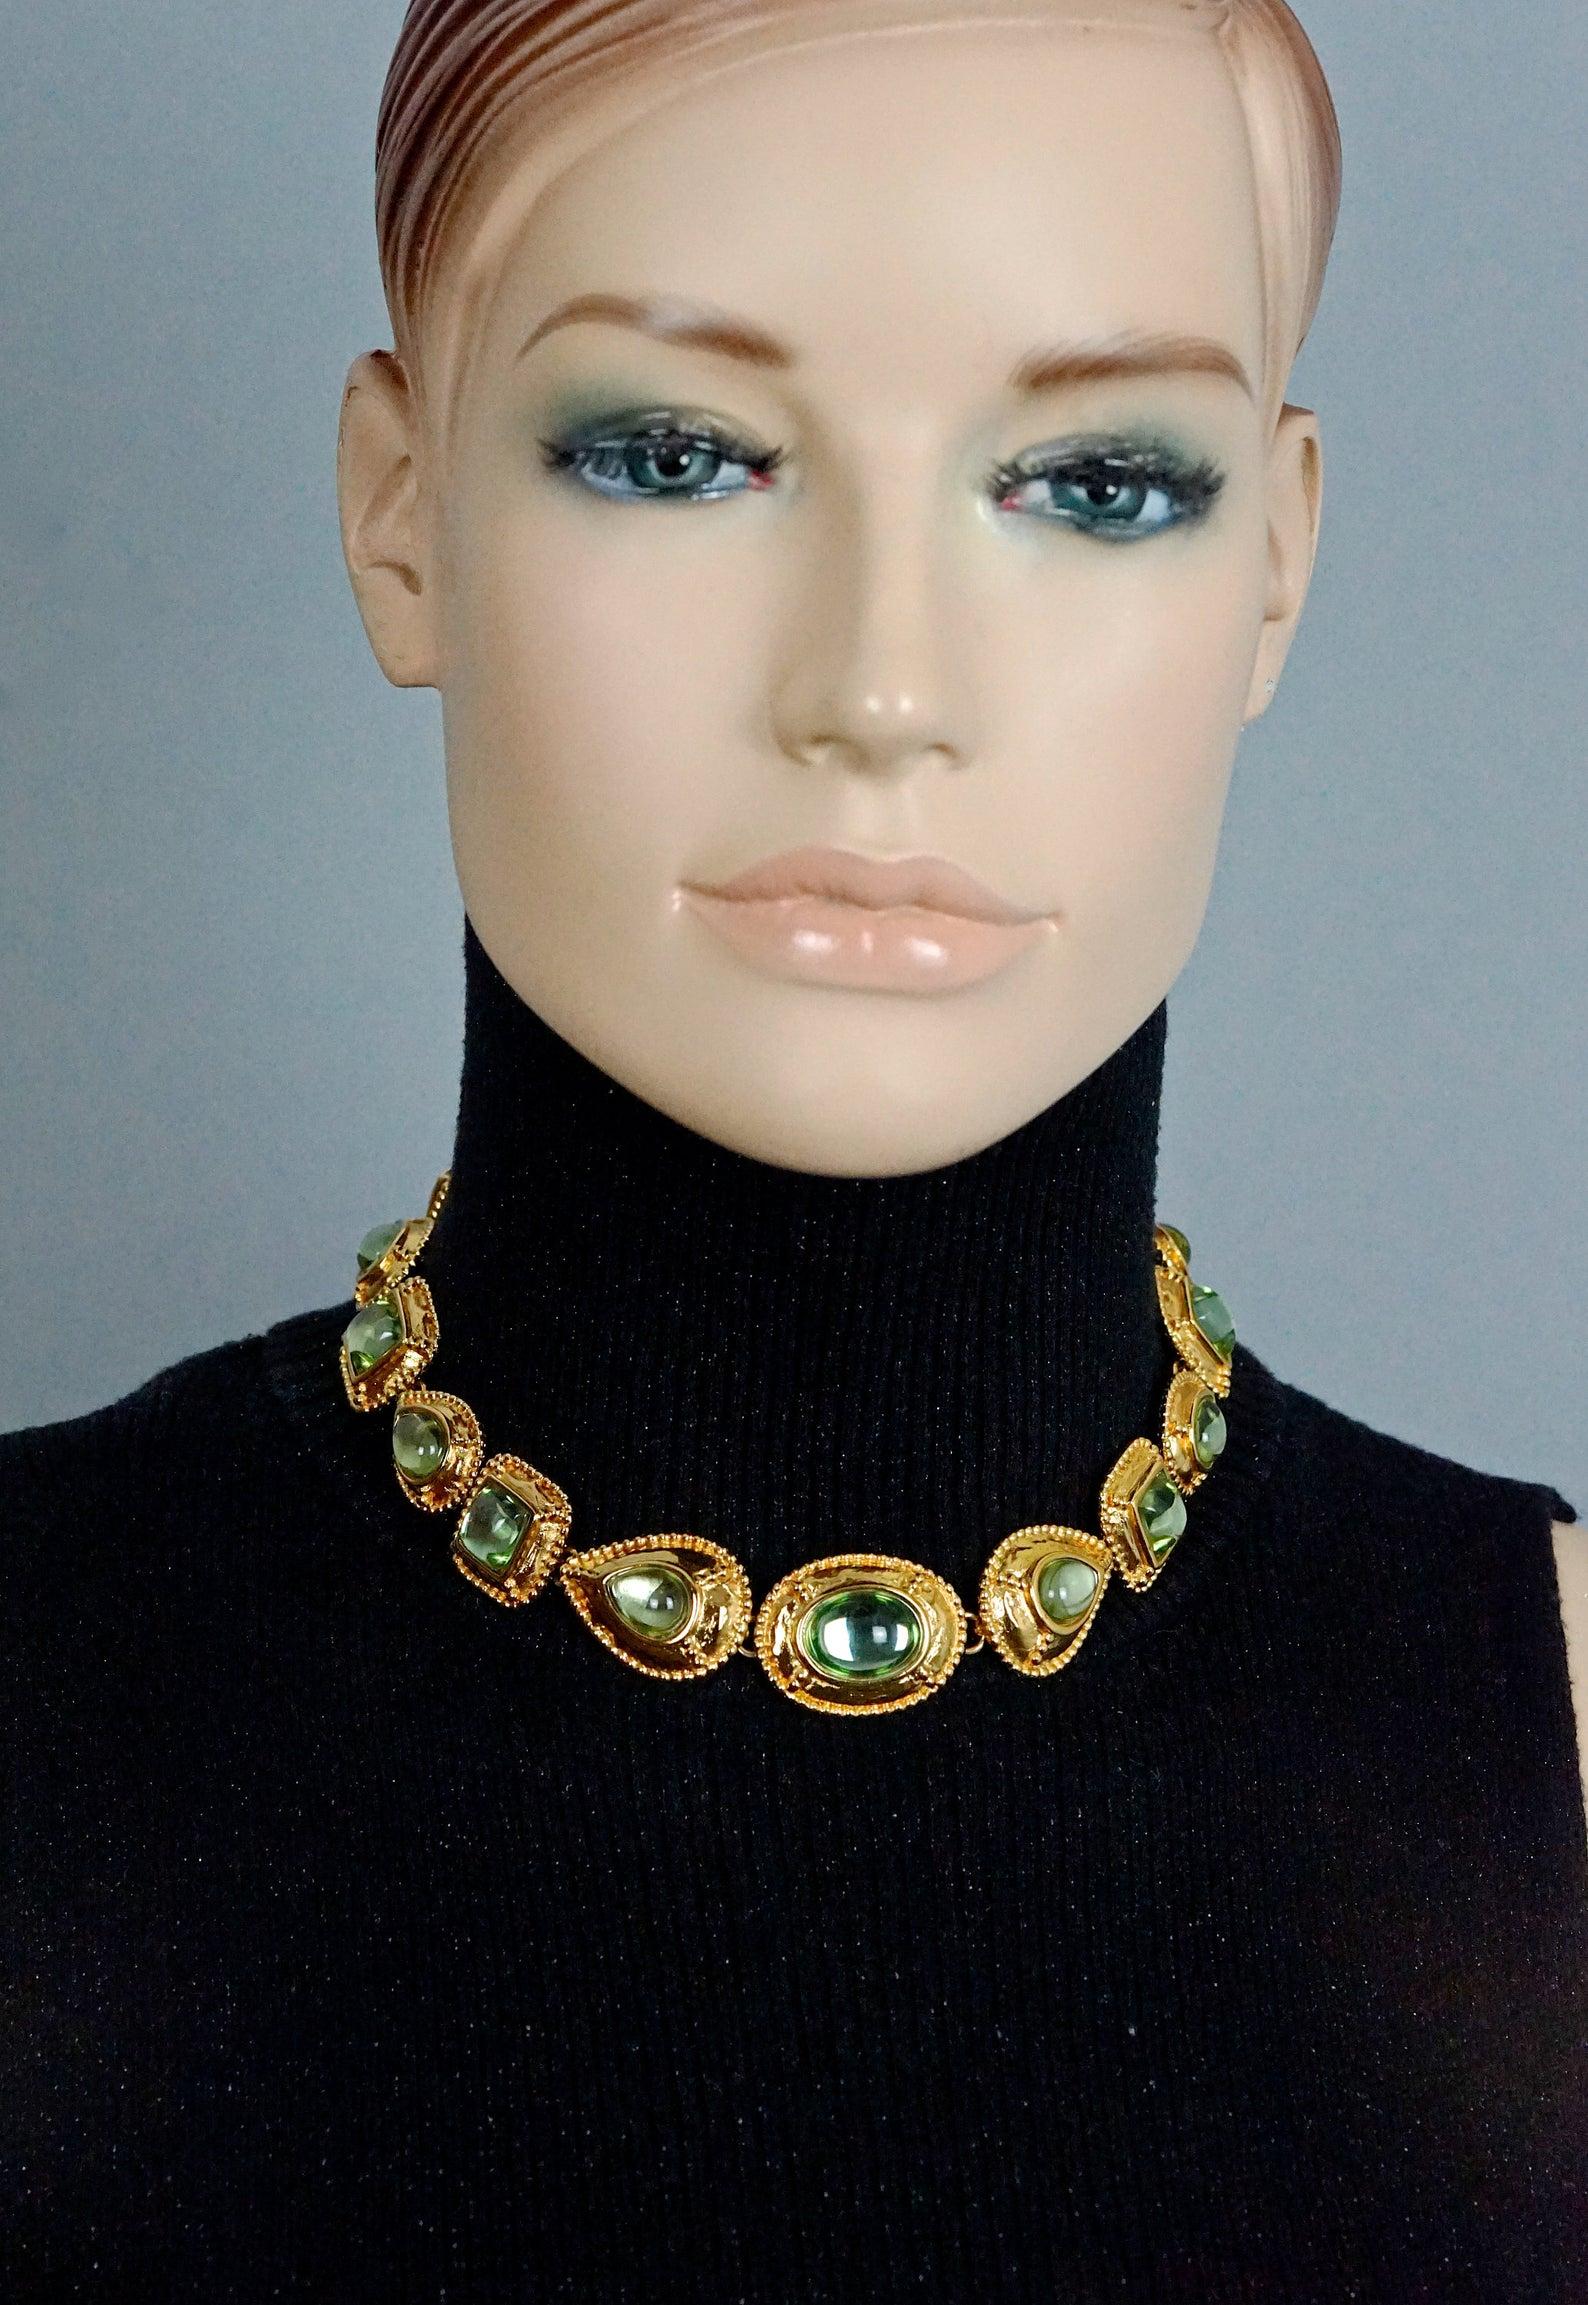 Vintage YVES SAINT LAURENT Cabochon Geometric Necklace by Robert Goossens

Measurements:
Height: 1 inch
Wearable Length: 14 inches to 16 4/8 inches

Features:
- 100% Authentic YVES SAINT LAURENT.
- Oval, pear and square textured links.
- Aqua marine